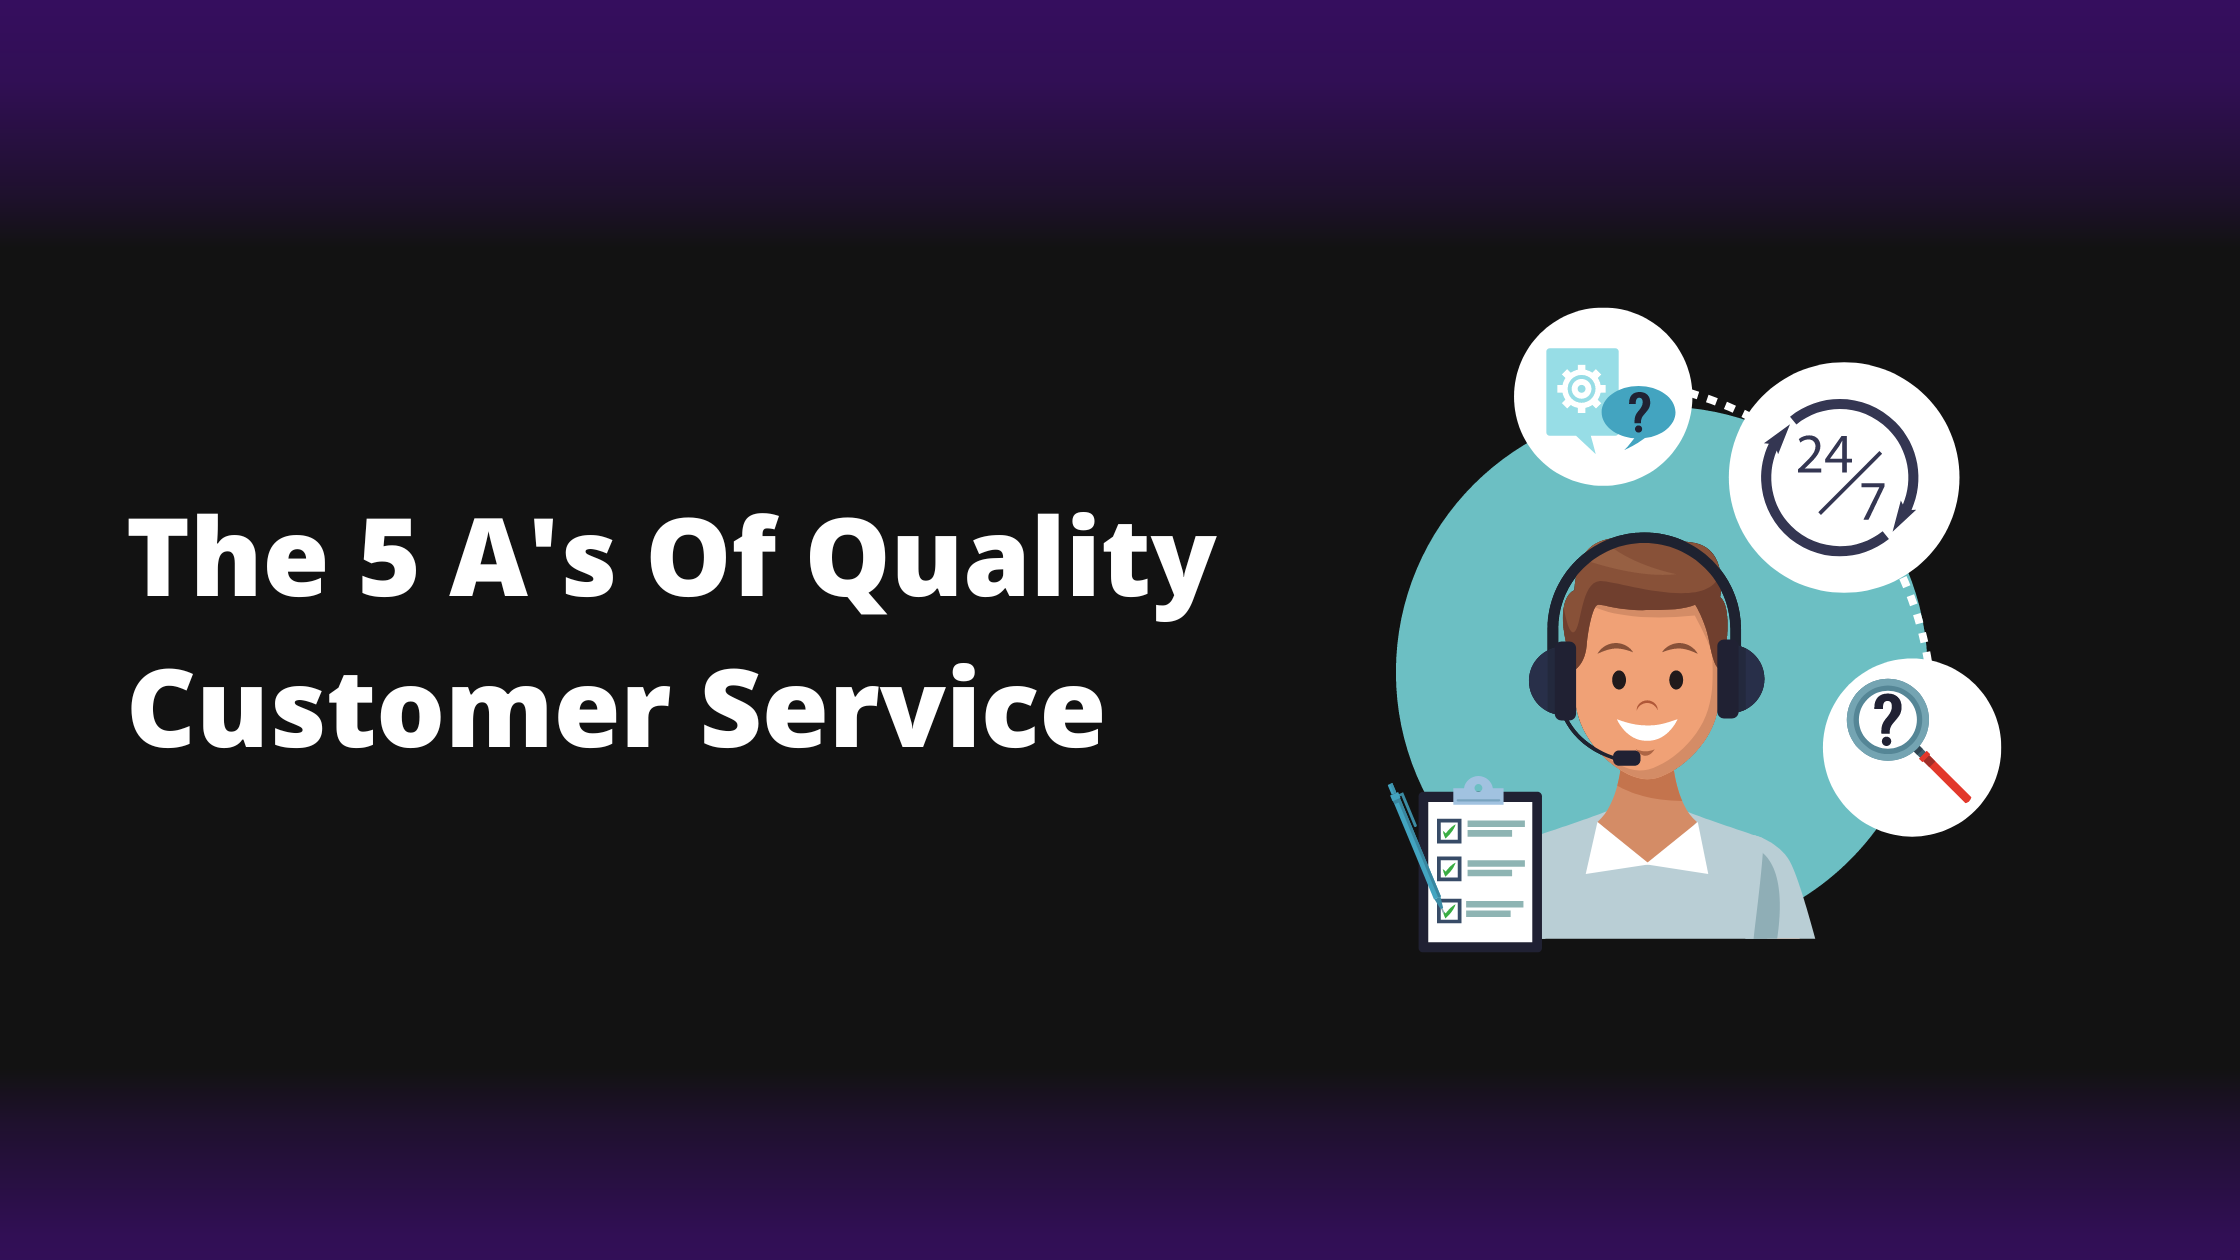 The 5 A’s of Quality Customer Service